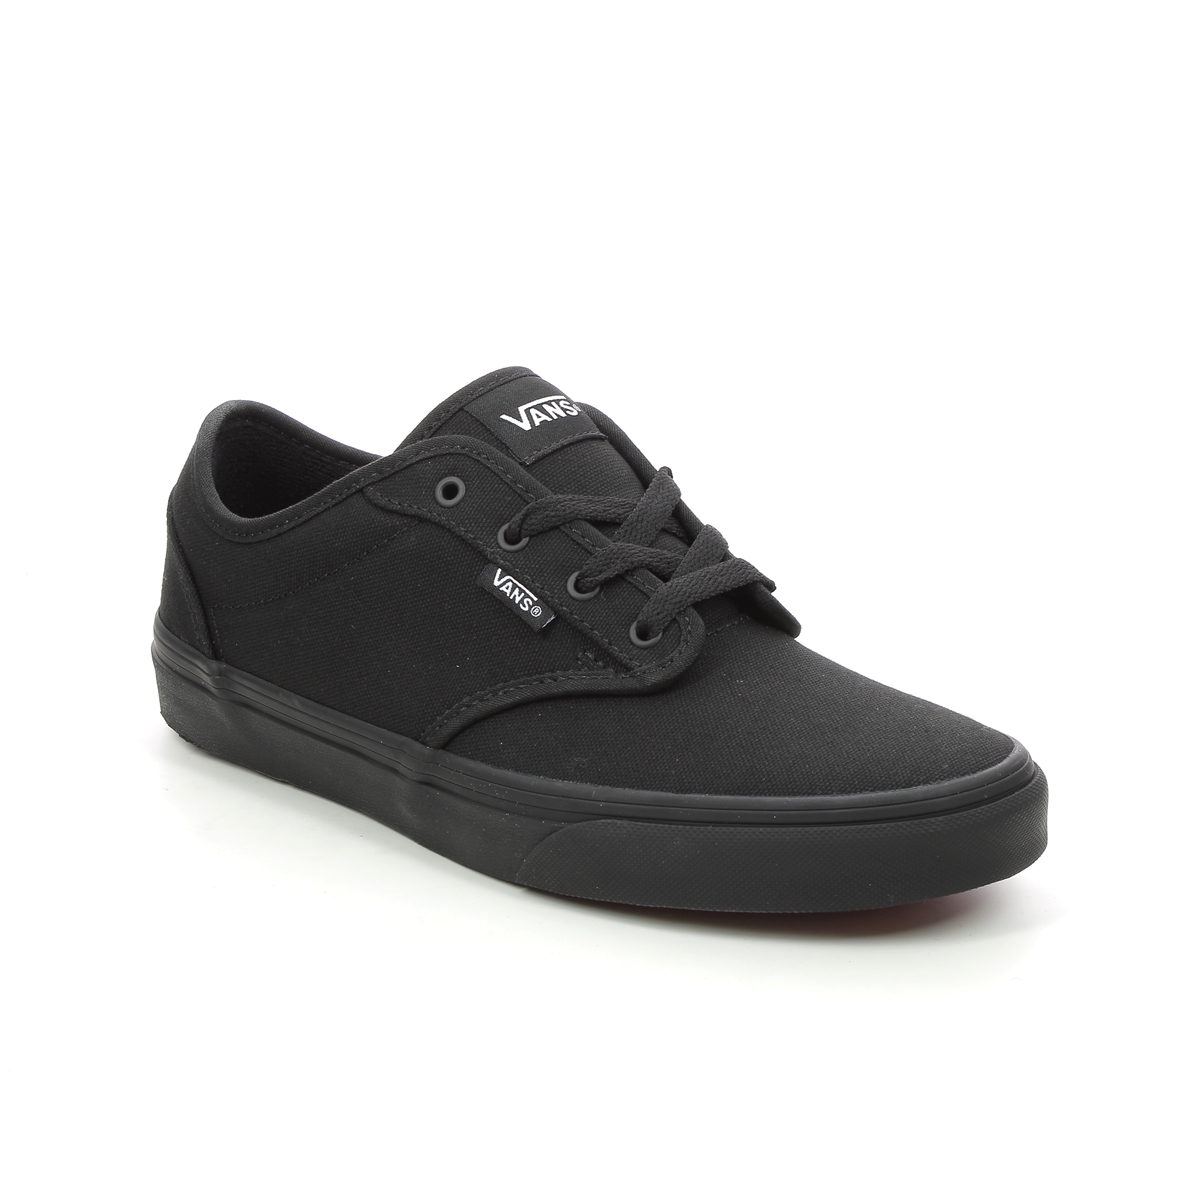 Vans Atwood Youth Black Kids Trainers  Vki5186 In Size 3.5 In Plain Black Vans Boys Trainers For School For kids